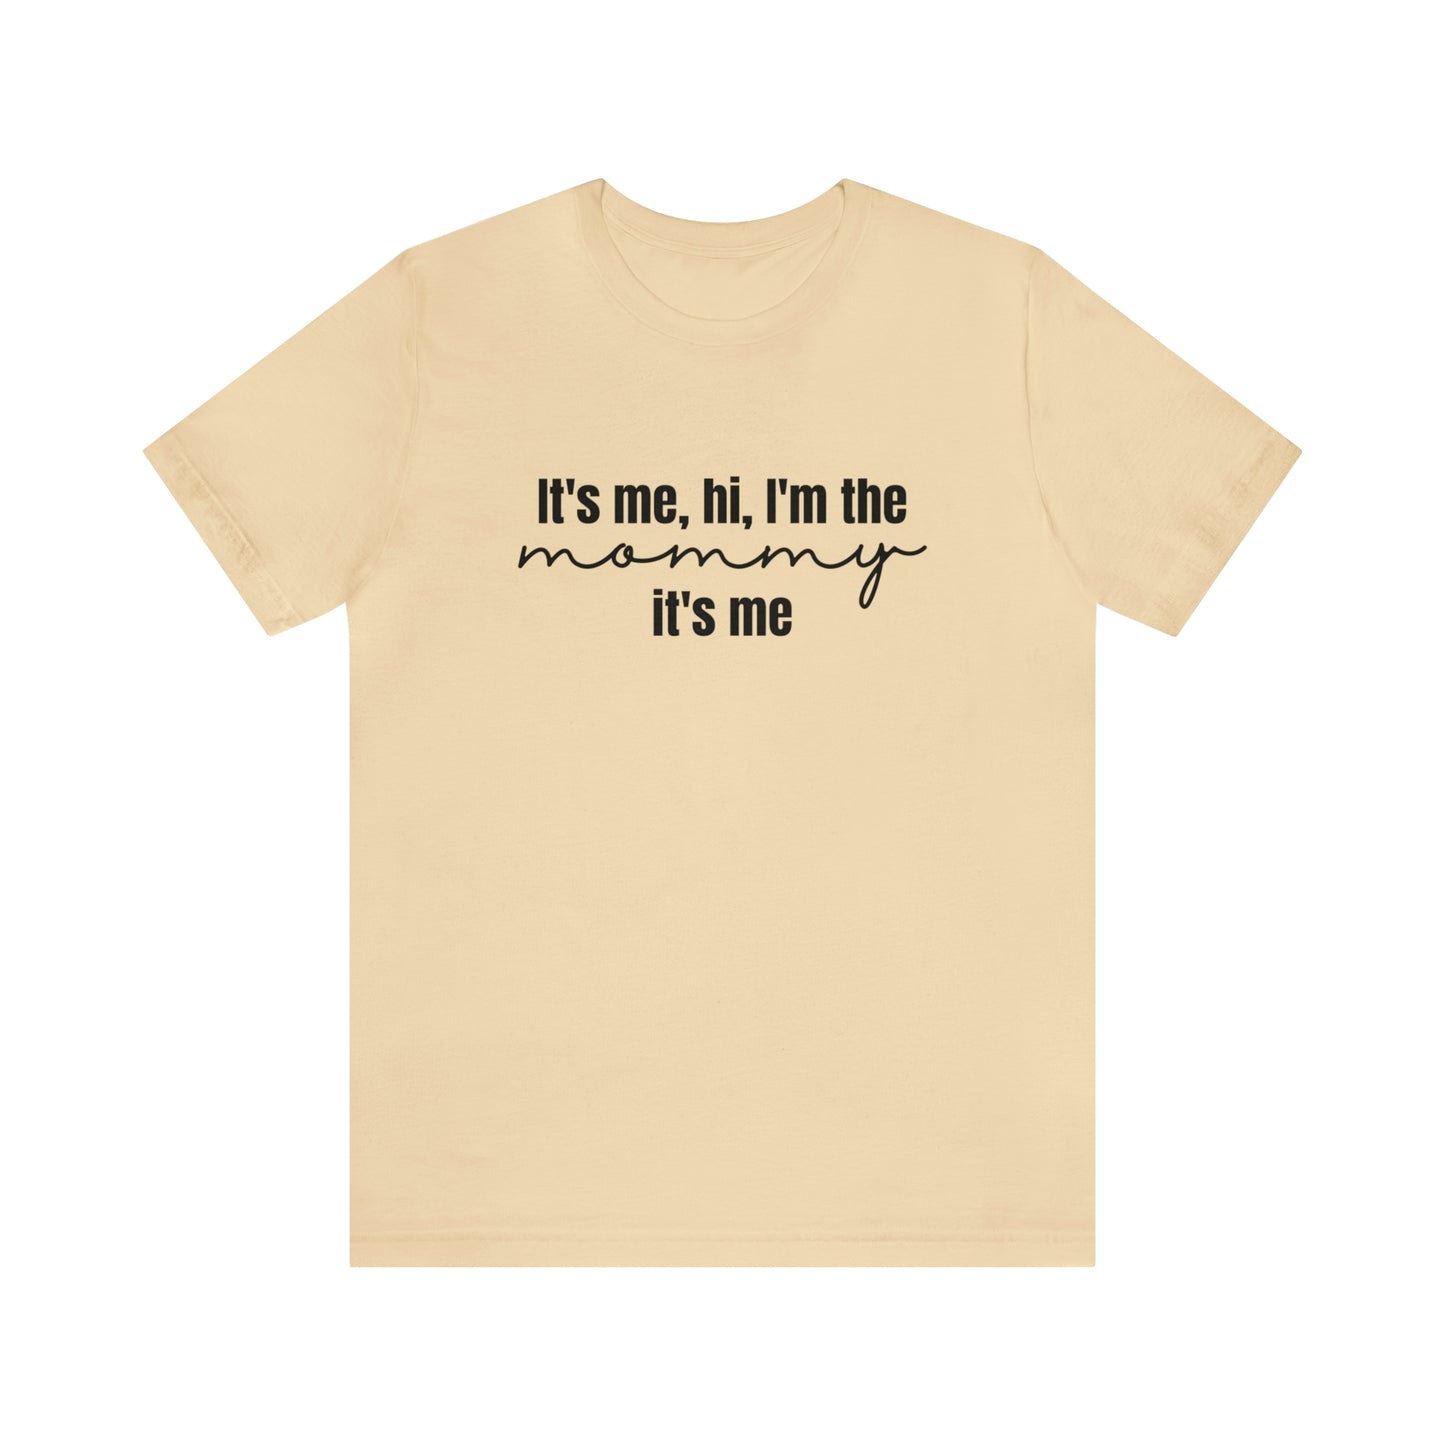 I'm the Mommy, Funny Mom Shirt for Mother's Day, Mom Birthday, Mommy Shirt, Bella and Canvas Cute Mom Shirts, Best Mom